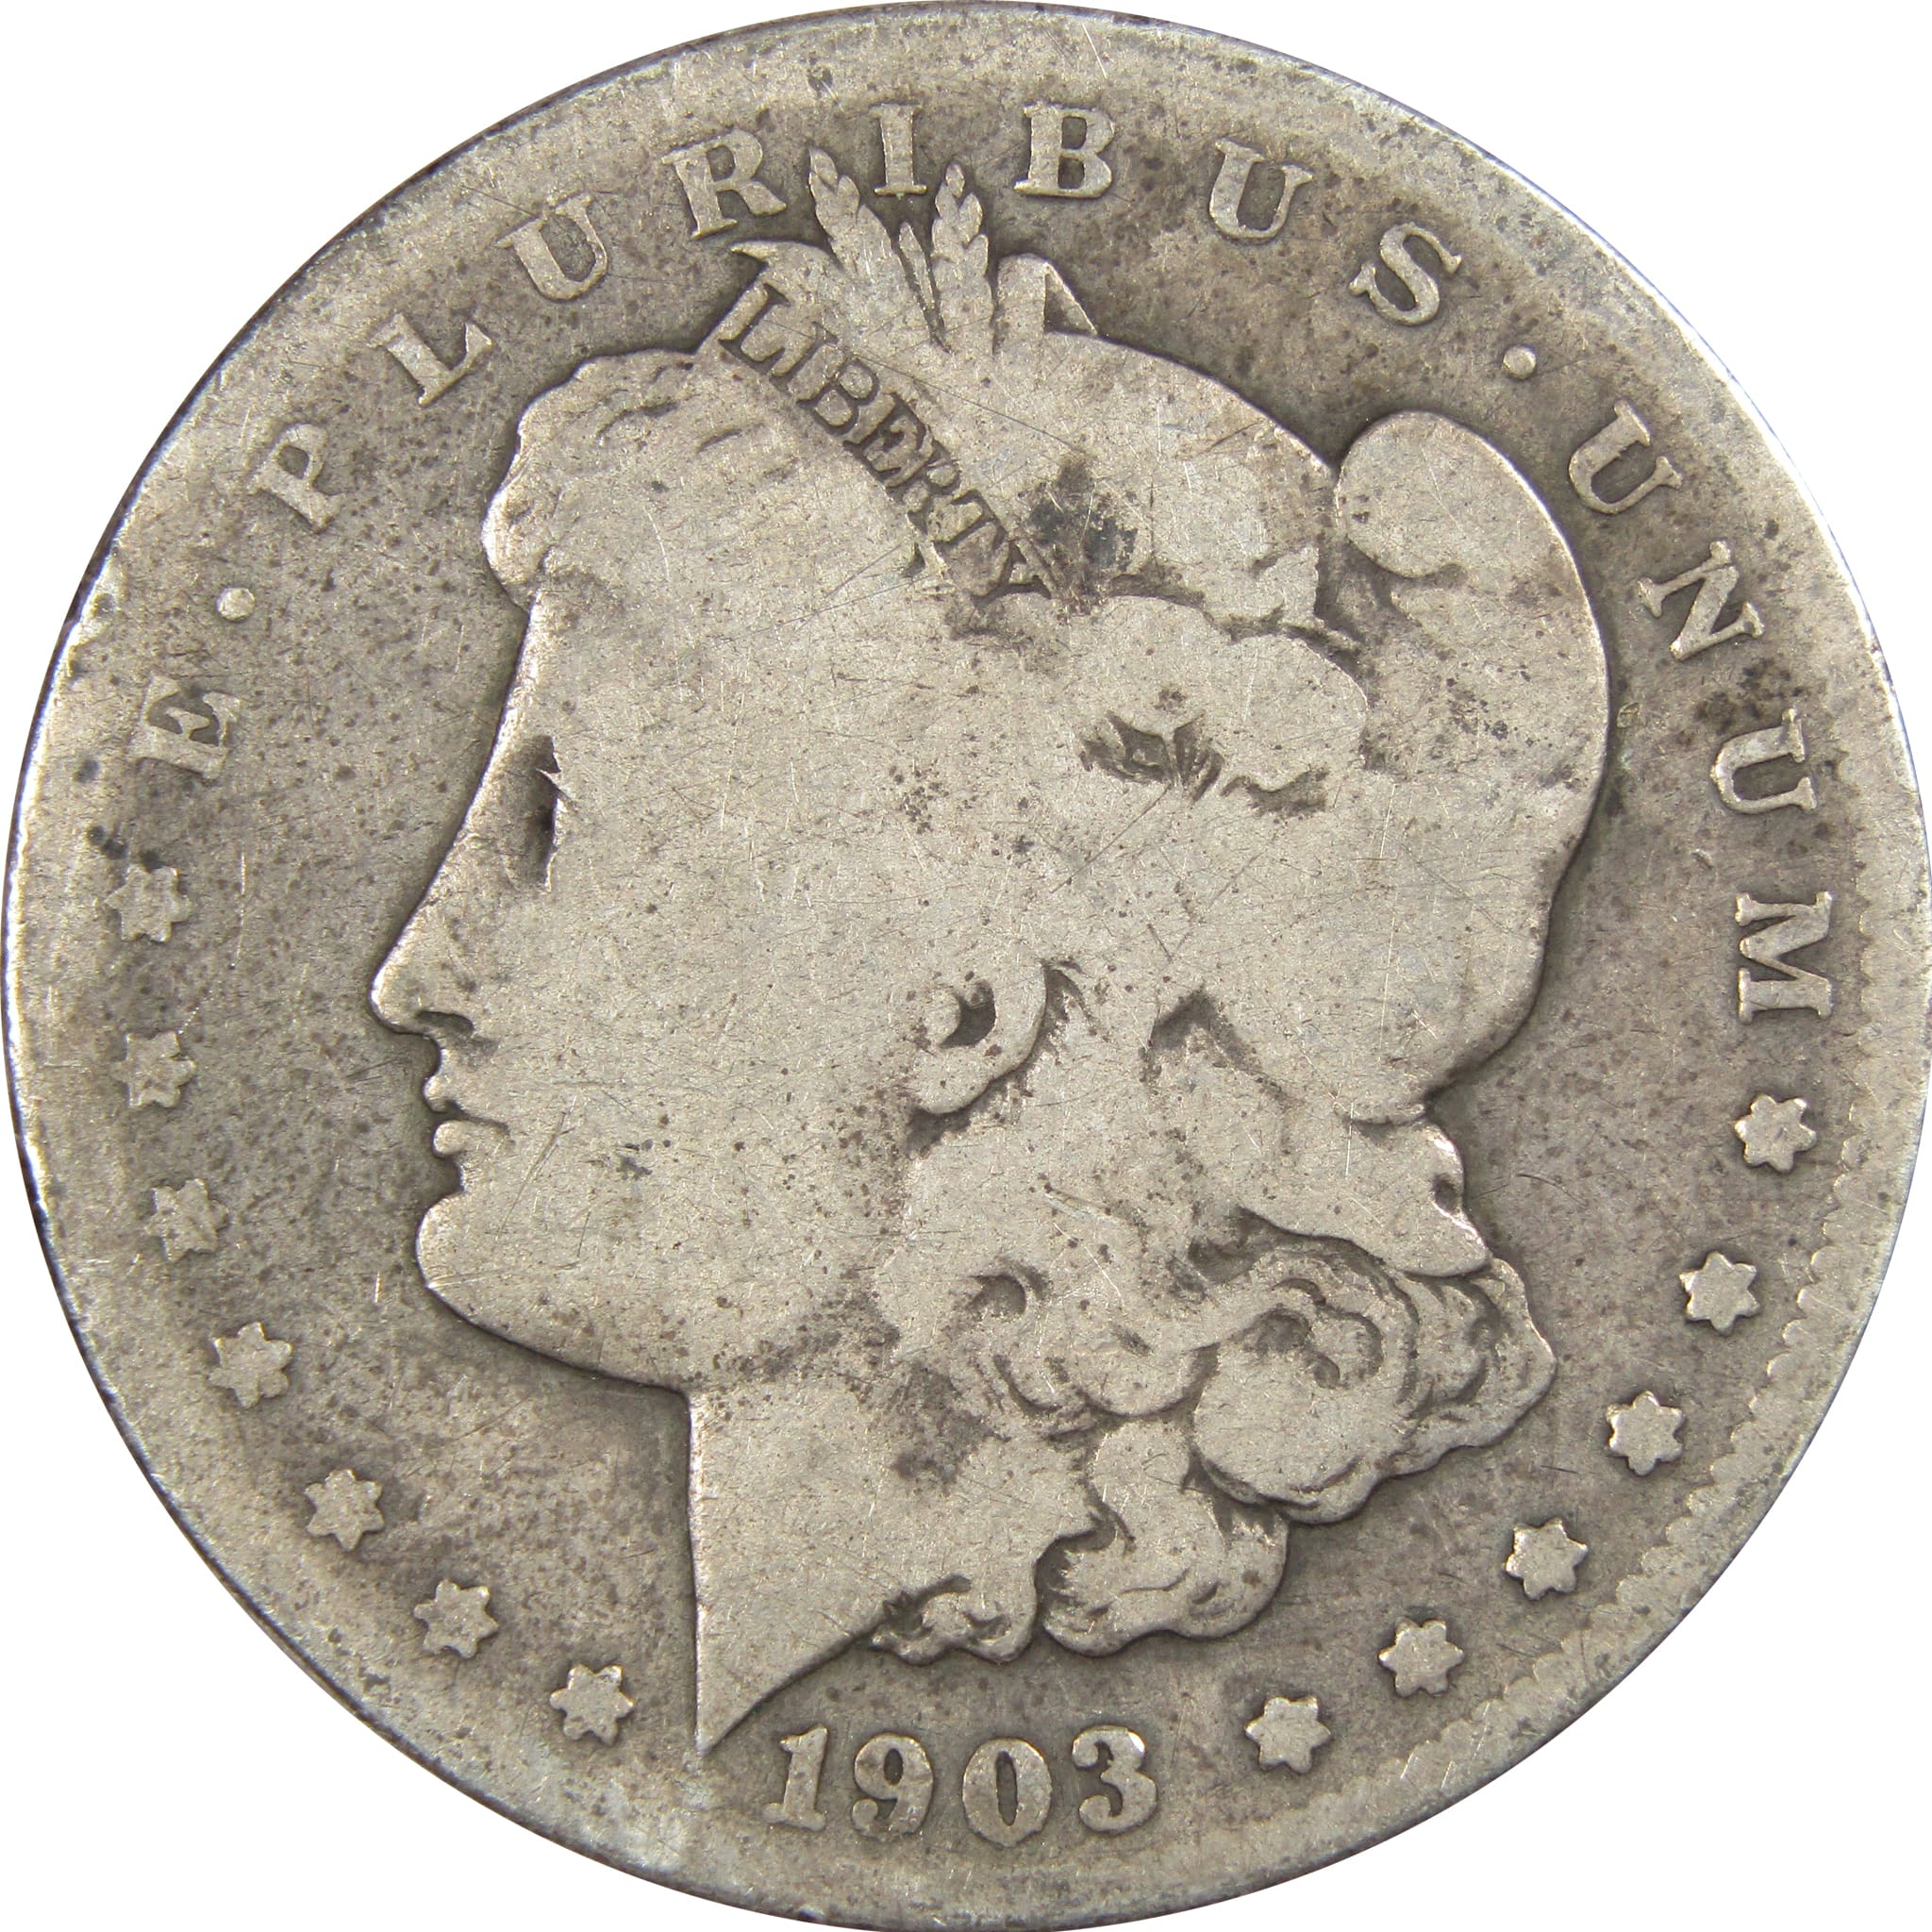 1903 S Morgan Dollar AG About Good 90% Silver US Coin SKU:IPC7470 - Morgan coin - Morgan silver dollar - Morgan silver dollar for sale - Profile Coins &amp; Collectibles